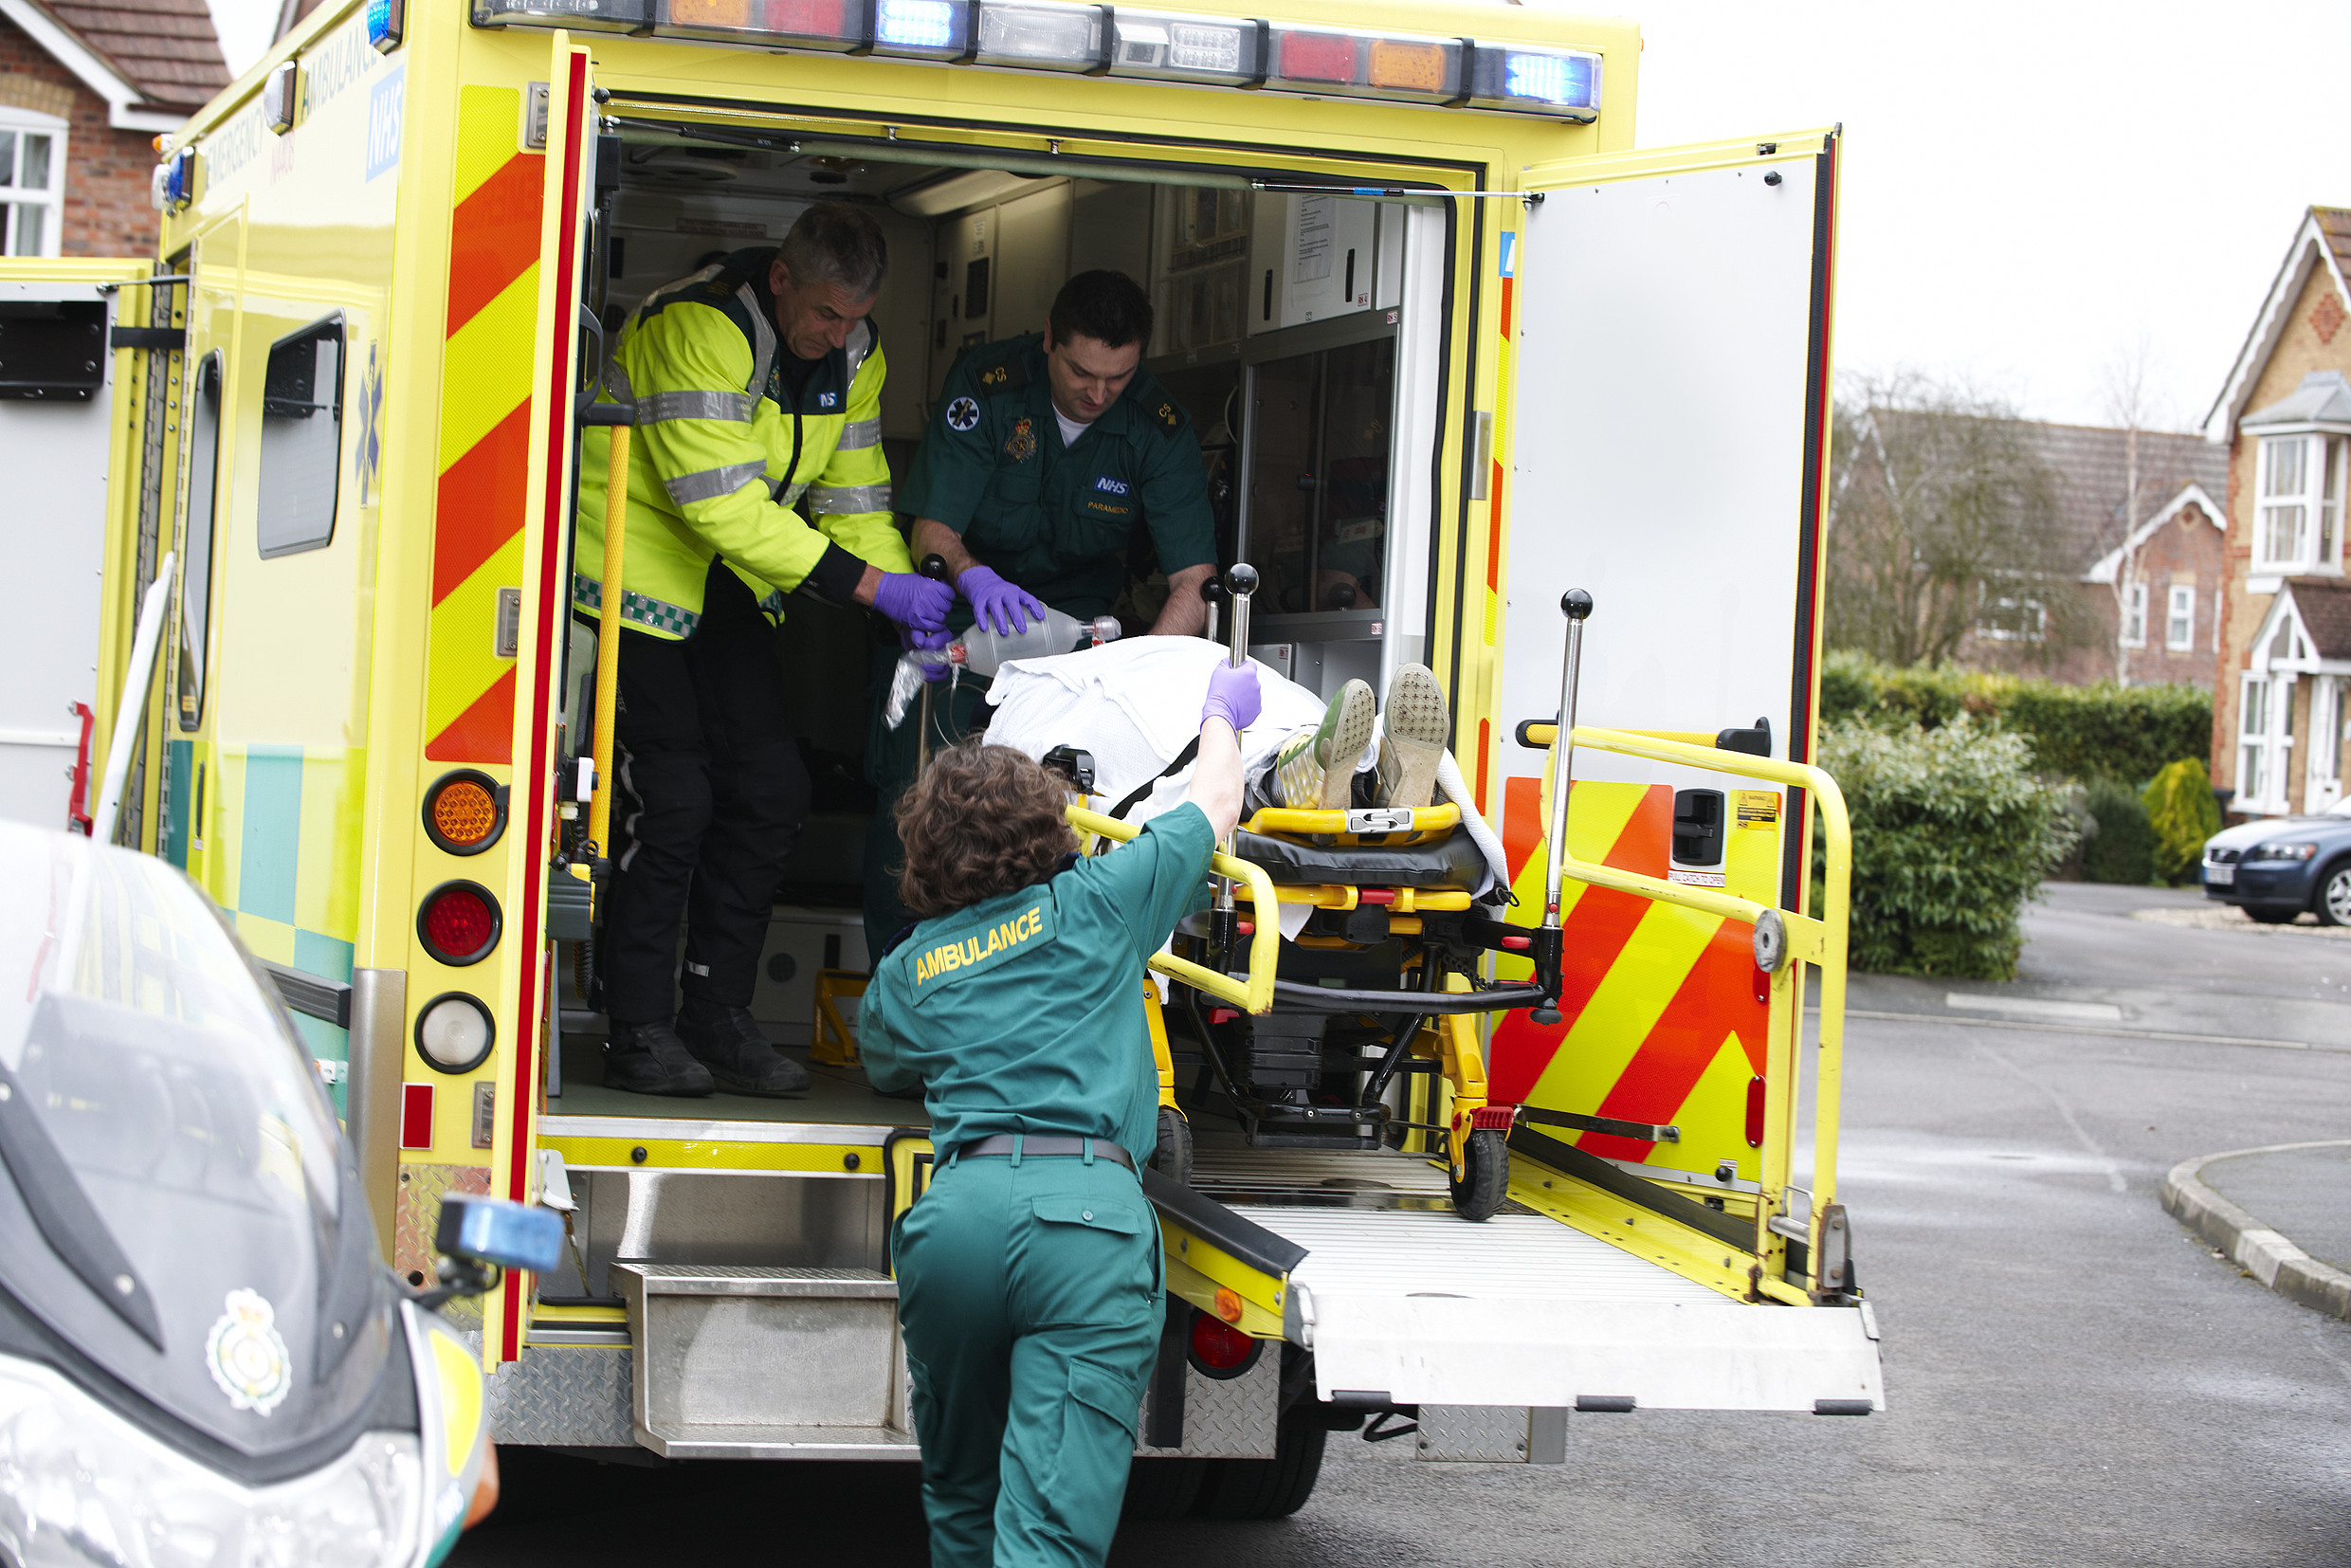 Ambulance services on board to promote public health - UK Health Security  Agency